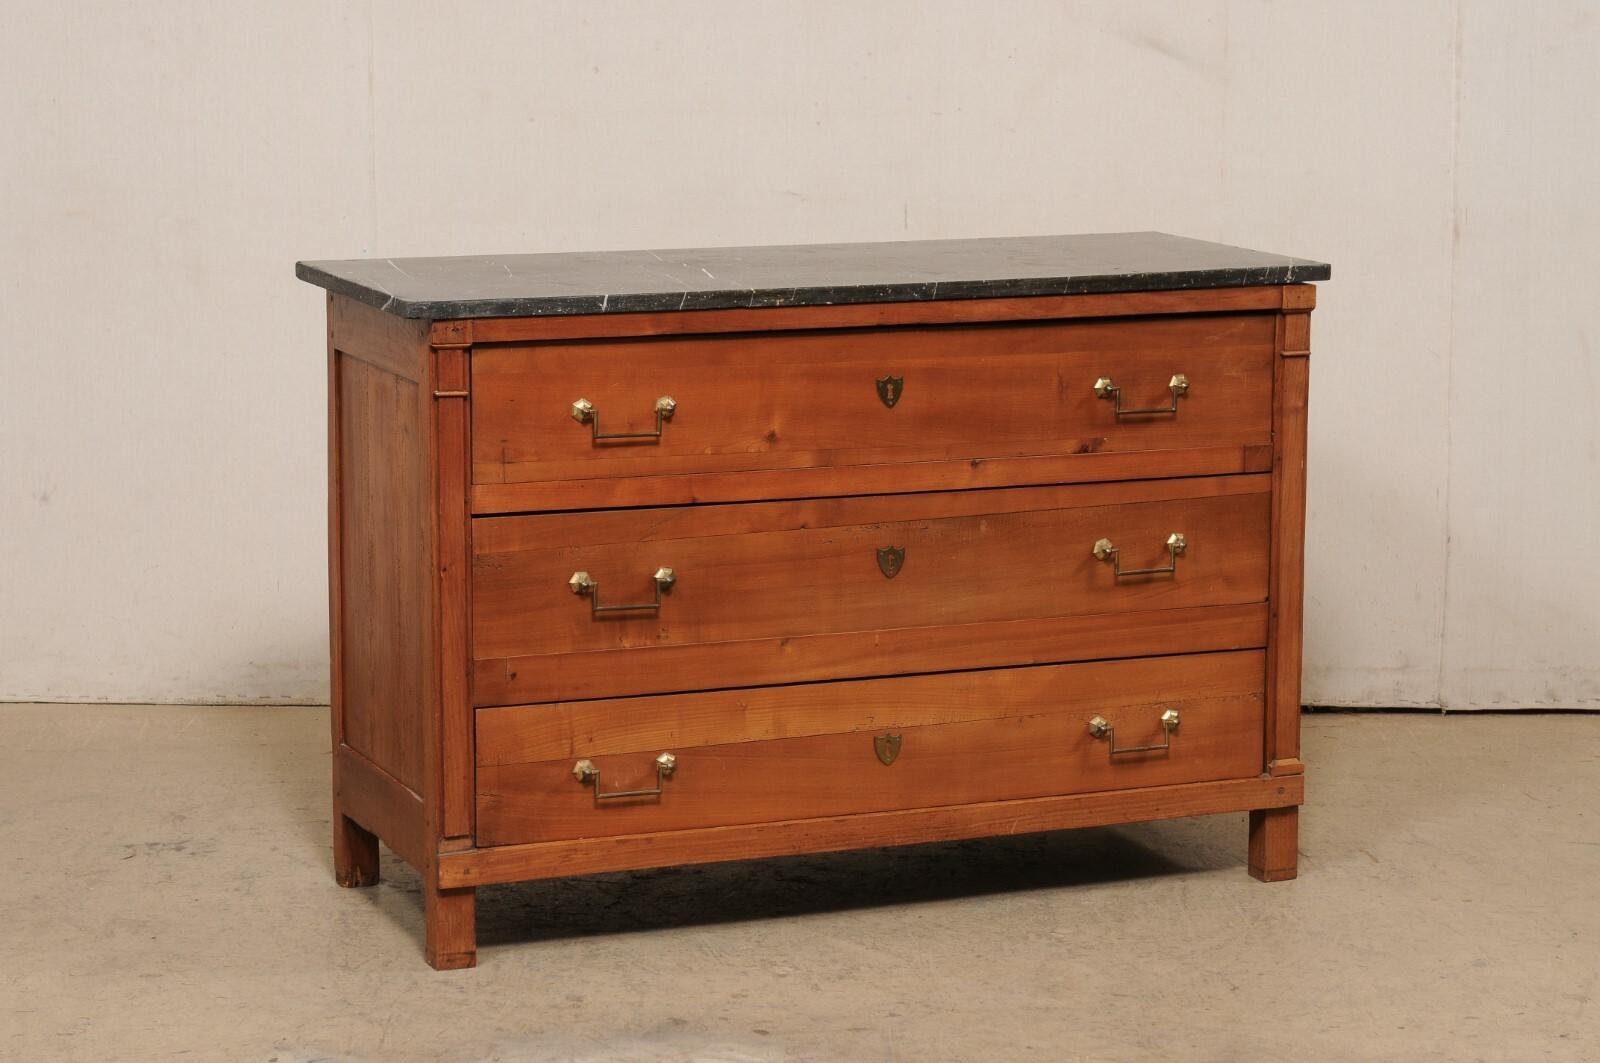 A French Neoclassical chest of drawers, with marble top, from the 19th century. This antique commode from France features a rectangular-shaped black marble top, which rests atop a case that houses three full size graduated drawers, set within